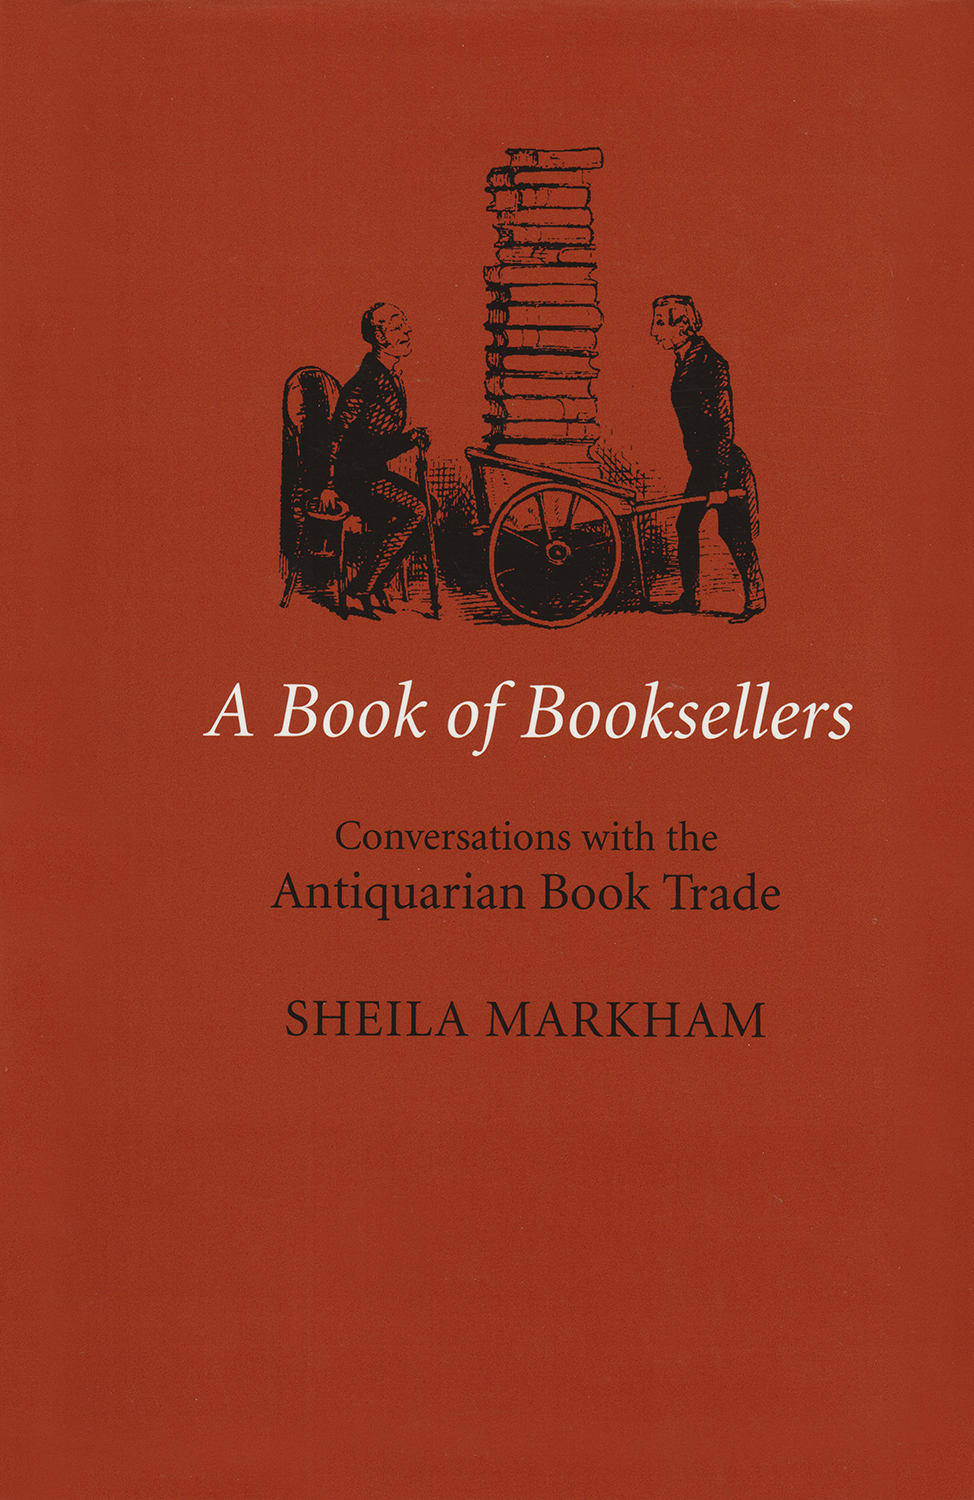 A Book of Booksellers